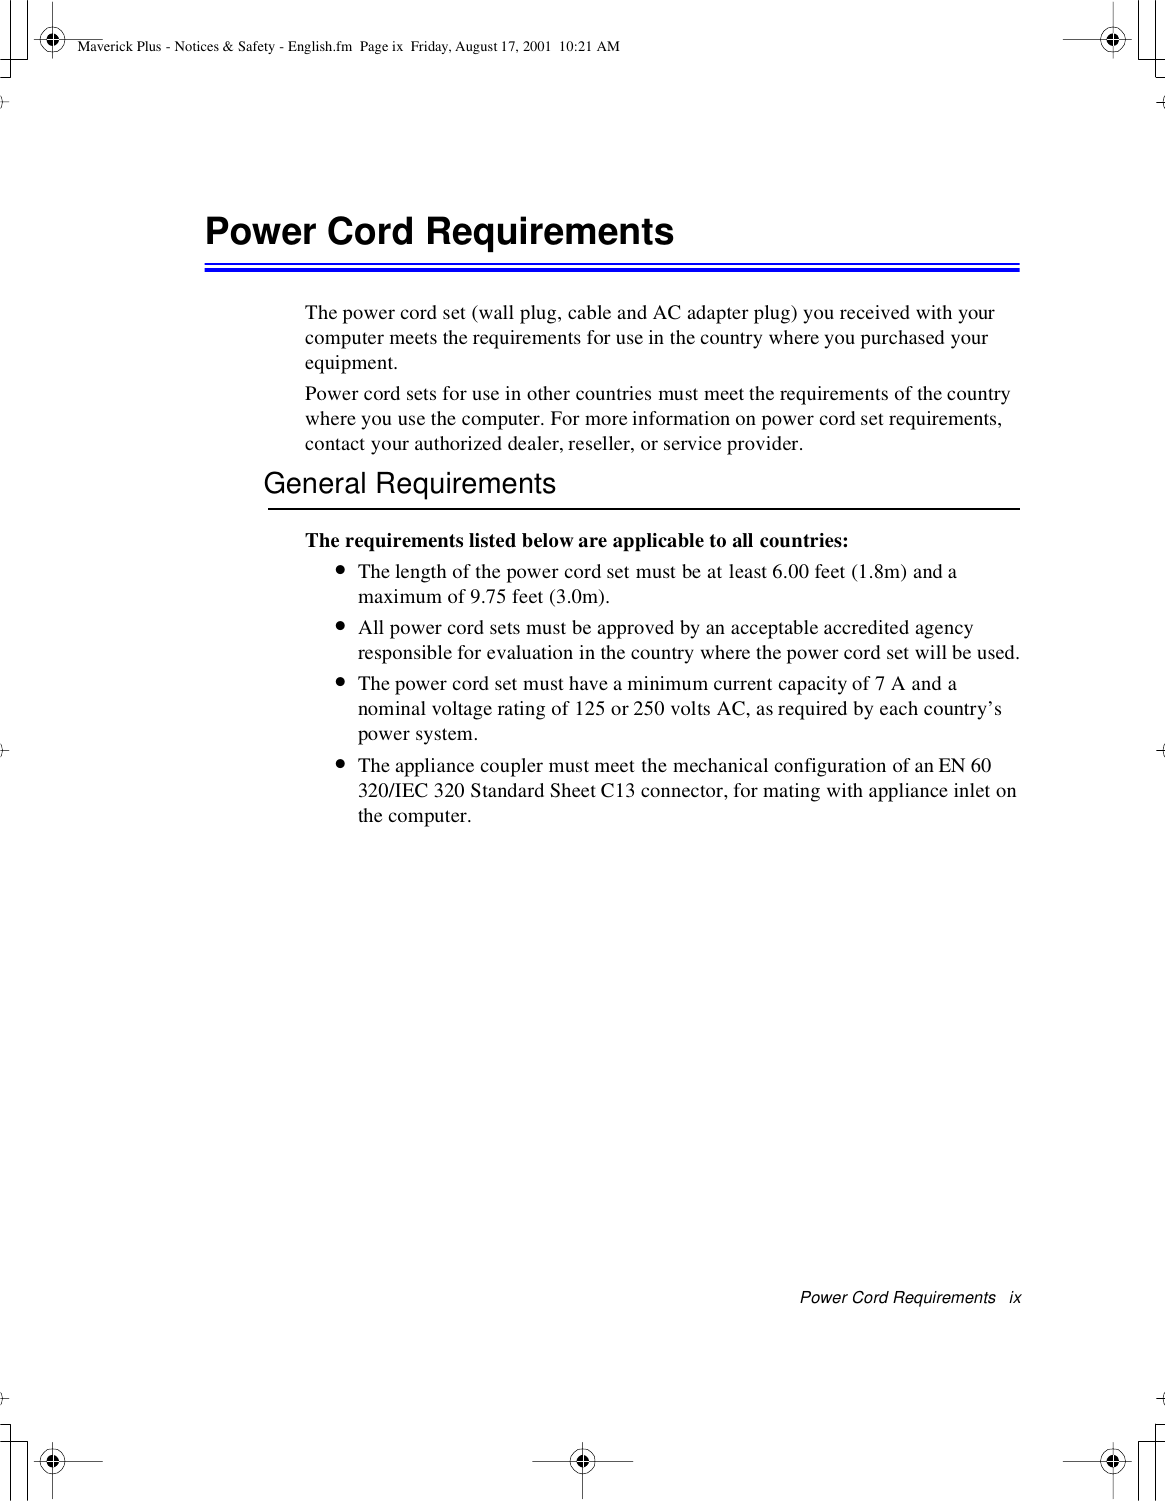 Power Cord Requirements ixPower Cord RequirementsThe power cord set (wall plug, cable and AC adapter plug) you received with yourcomputer meets the requirements for use in the country where you purchased yourequipment.Power cord sets for use in other countries must meet the requirements of the countrywhere you use the computer. For more information on power cord set requirements,contact your authorized dealer, reseller, or service provider.General RequirementsThe requirements listed below are applicable to all countries:•The length of the power cord set must be at least 6.00 feet (1.8m) and amaximum of 9.75 feet (3.0m).•All power cord sets must be approved by an acceptable accredited agencyresponsible for evaluation in the country where the power cord set will be used.•The power cord set must have a minimum current capacity of 7 A and anominal voltage rating of 125 or 250 volts AC, as required by each country’spower system.•The appliance coupler must meet the mechanical configuration of an EN 60320/IEC 320 Standard Sheet C13 connector, for mating with appliance inlet onthe computer.Maverick Plus - Notices &amp; Safety - English.fm Page ix Friday, August 17, 2001 10:21 AM